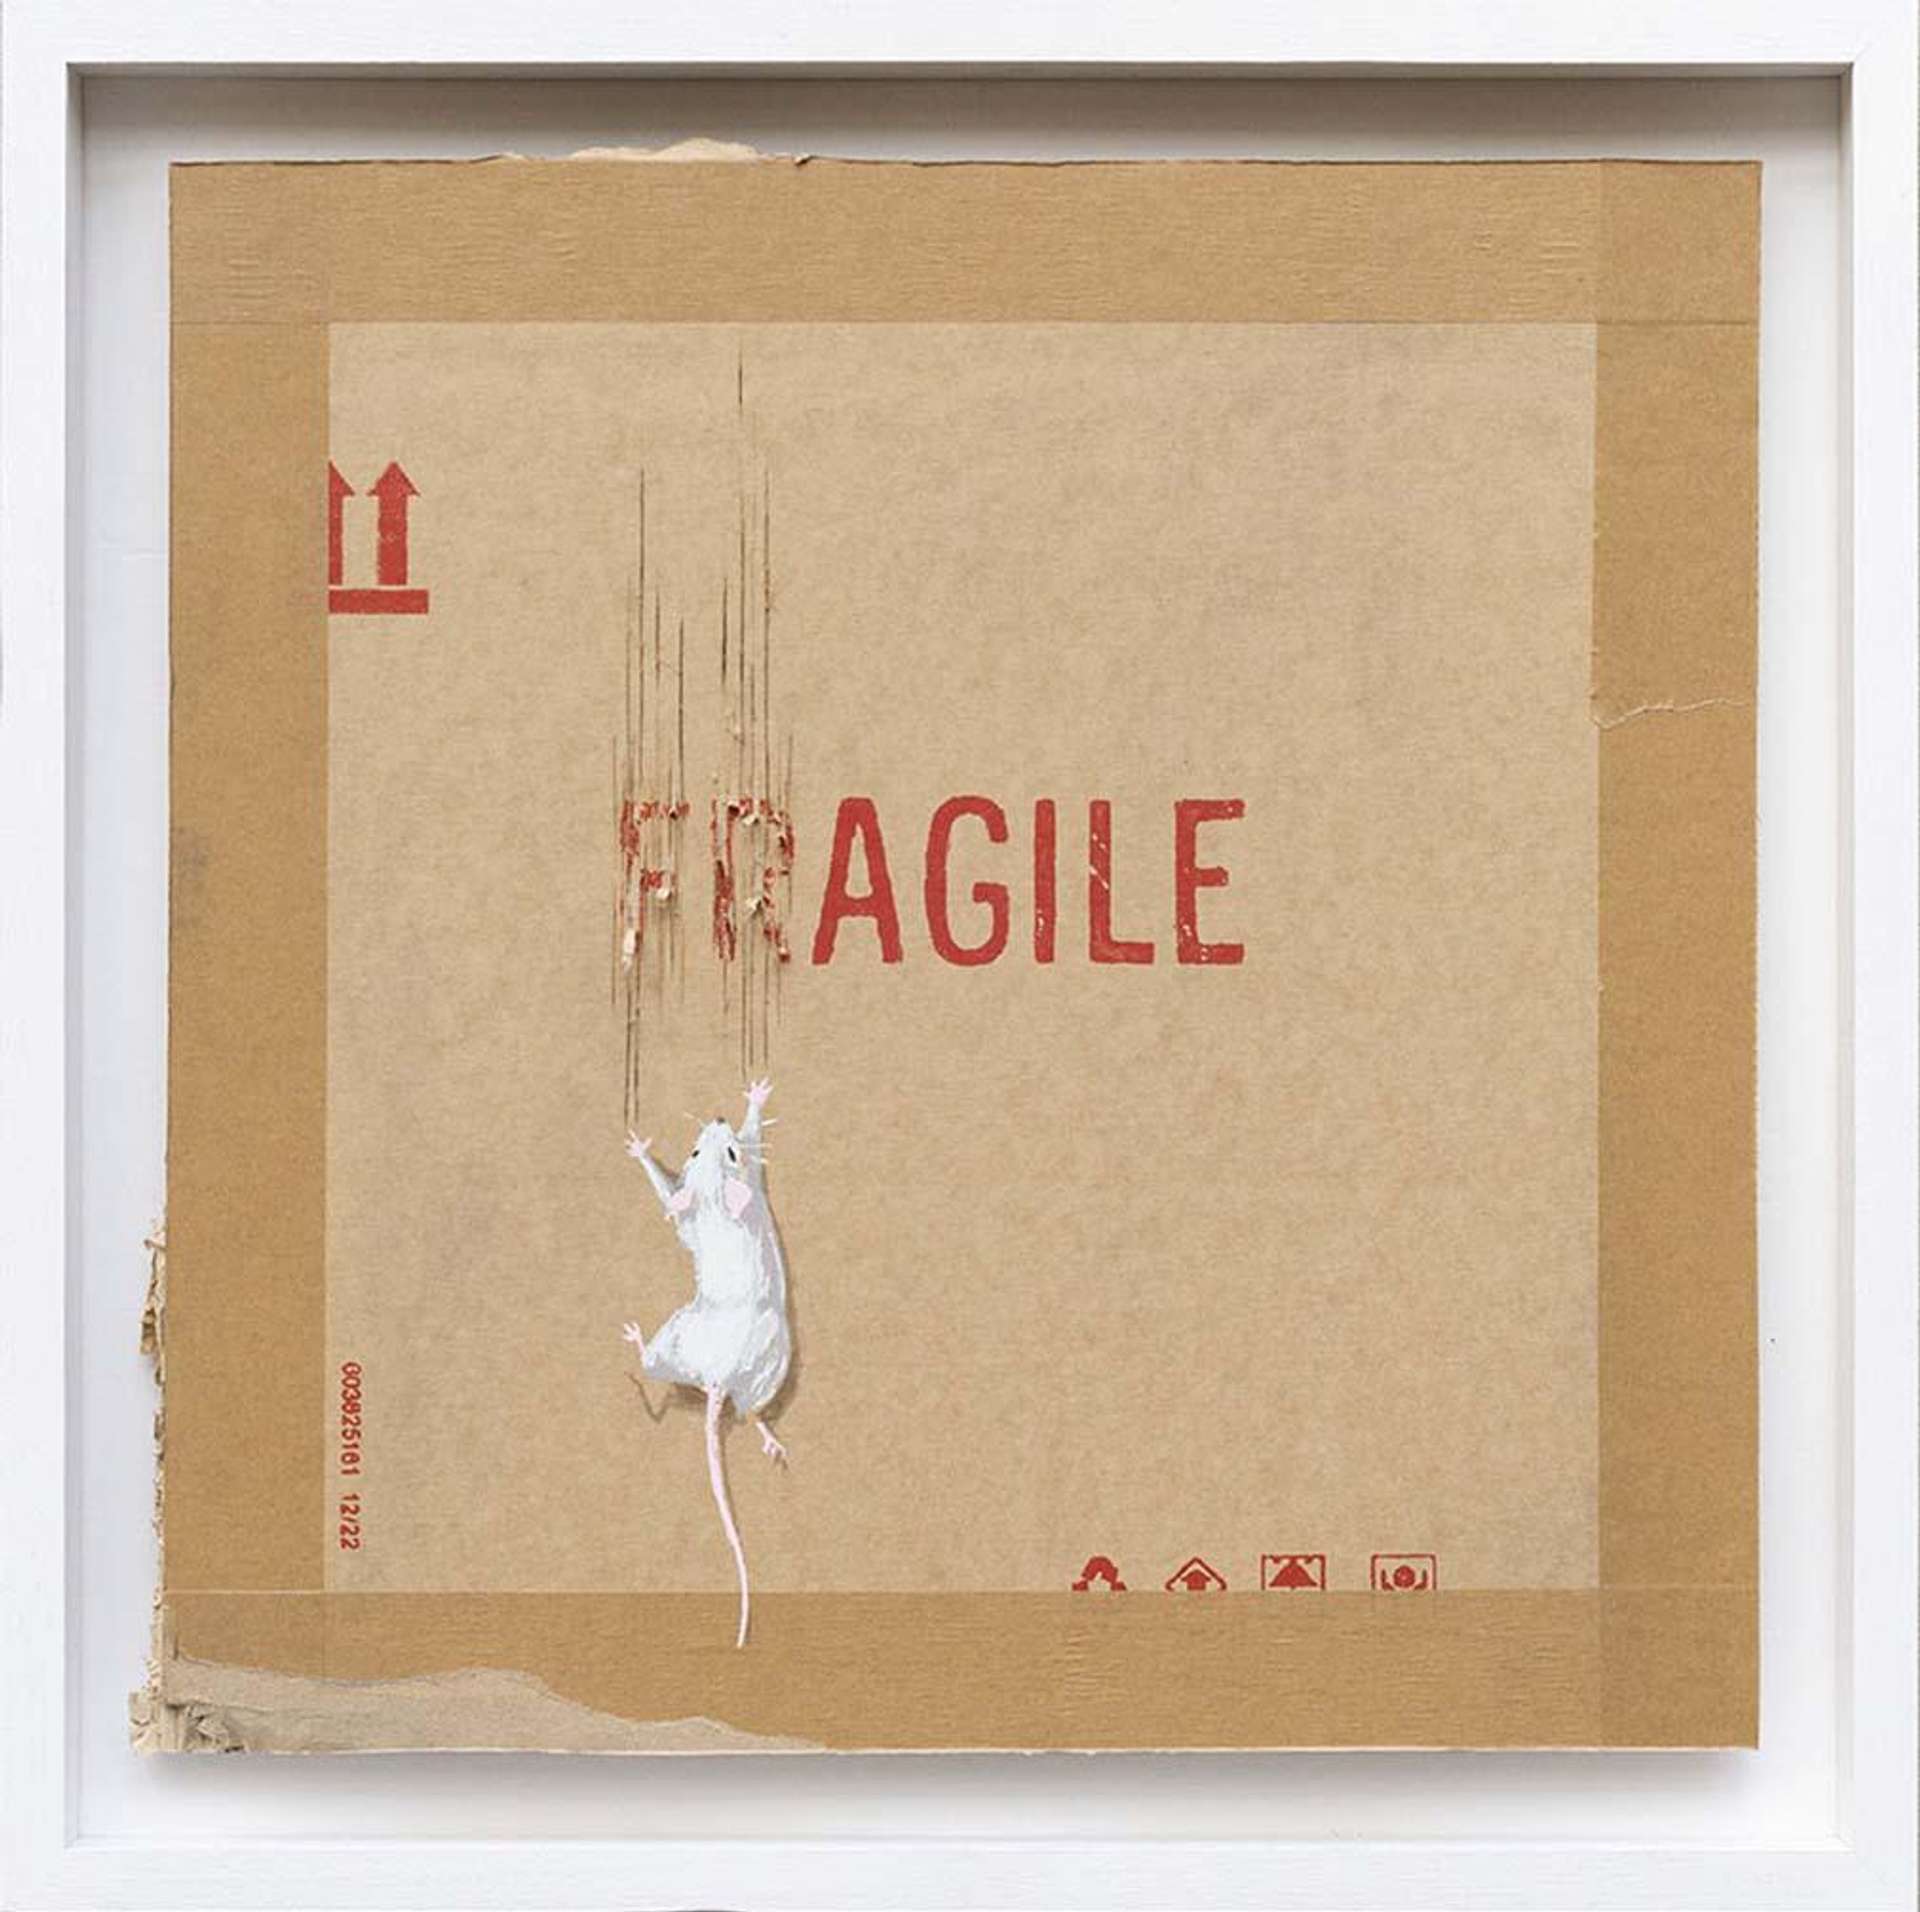 An image of the artwork Agile by Banksy, which depicts a white rat attempting to keep himself from sliding down a cardboard box that says “Fragile”.